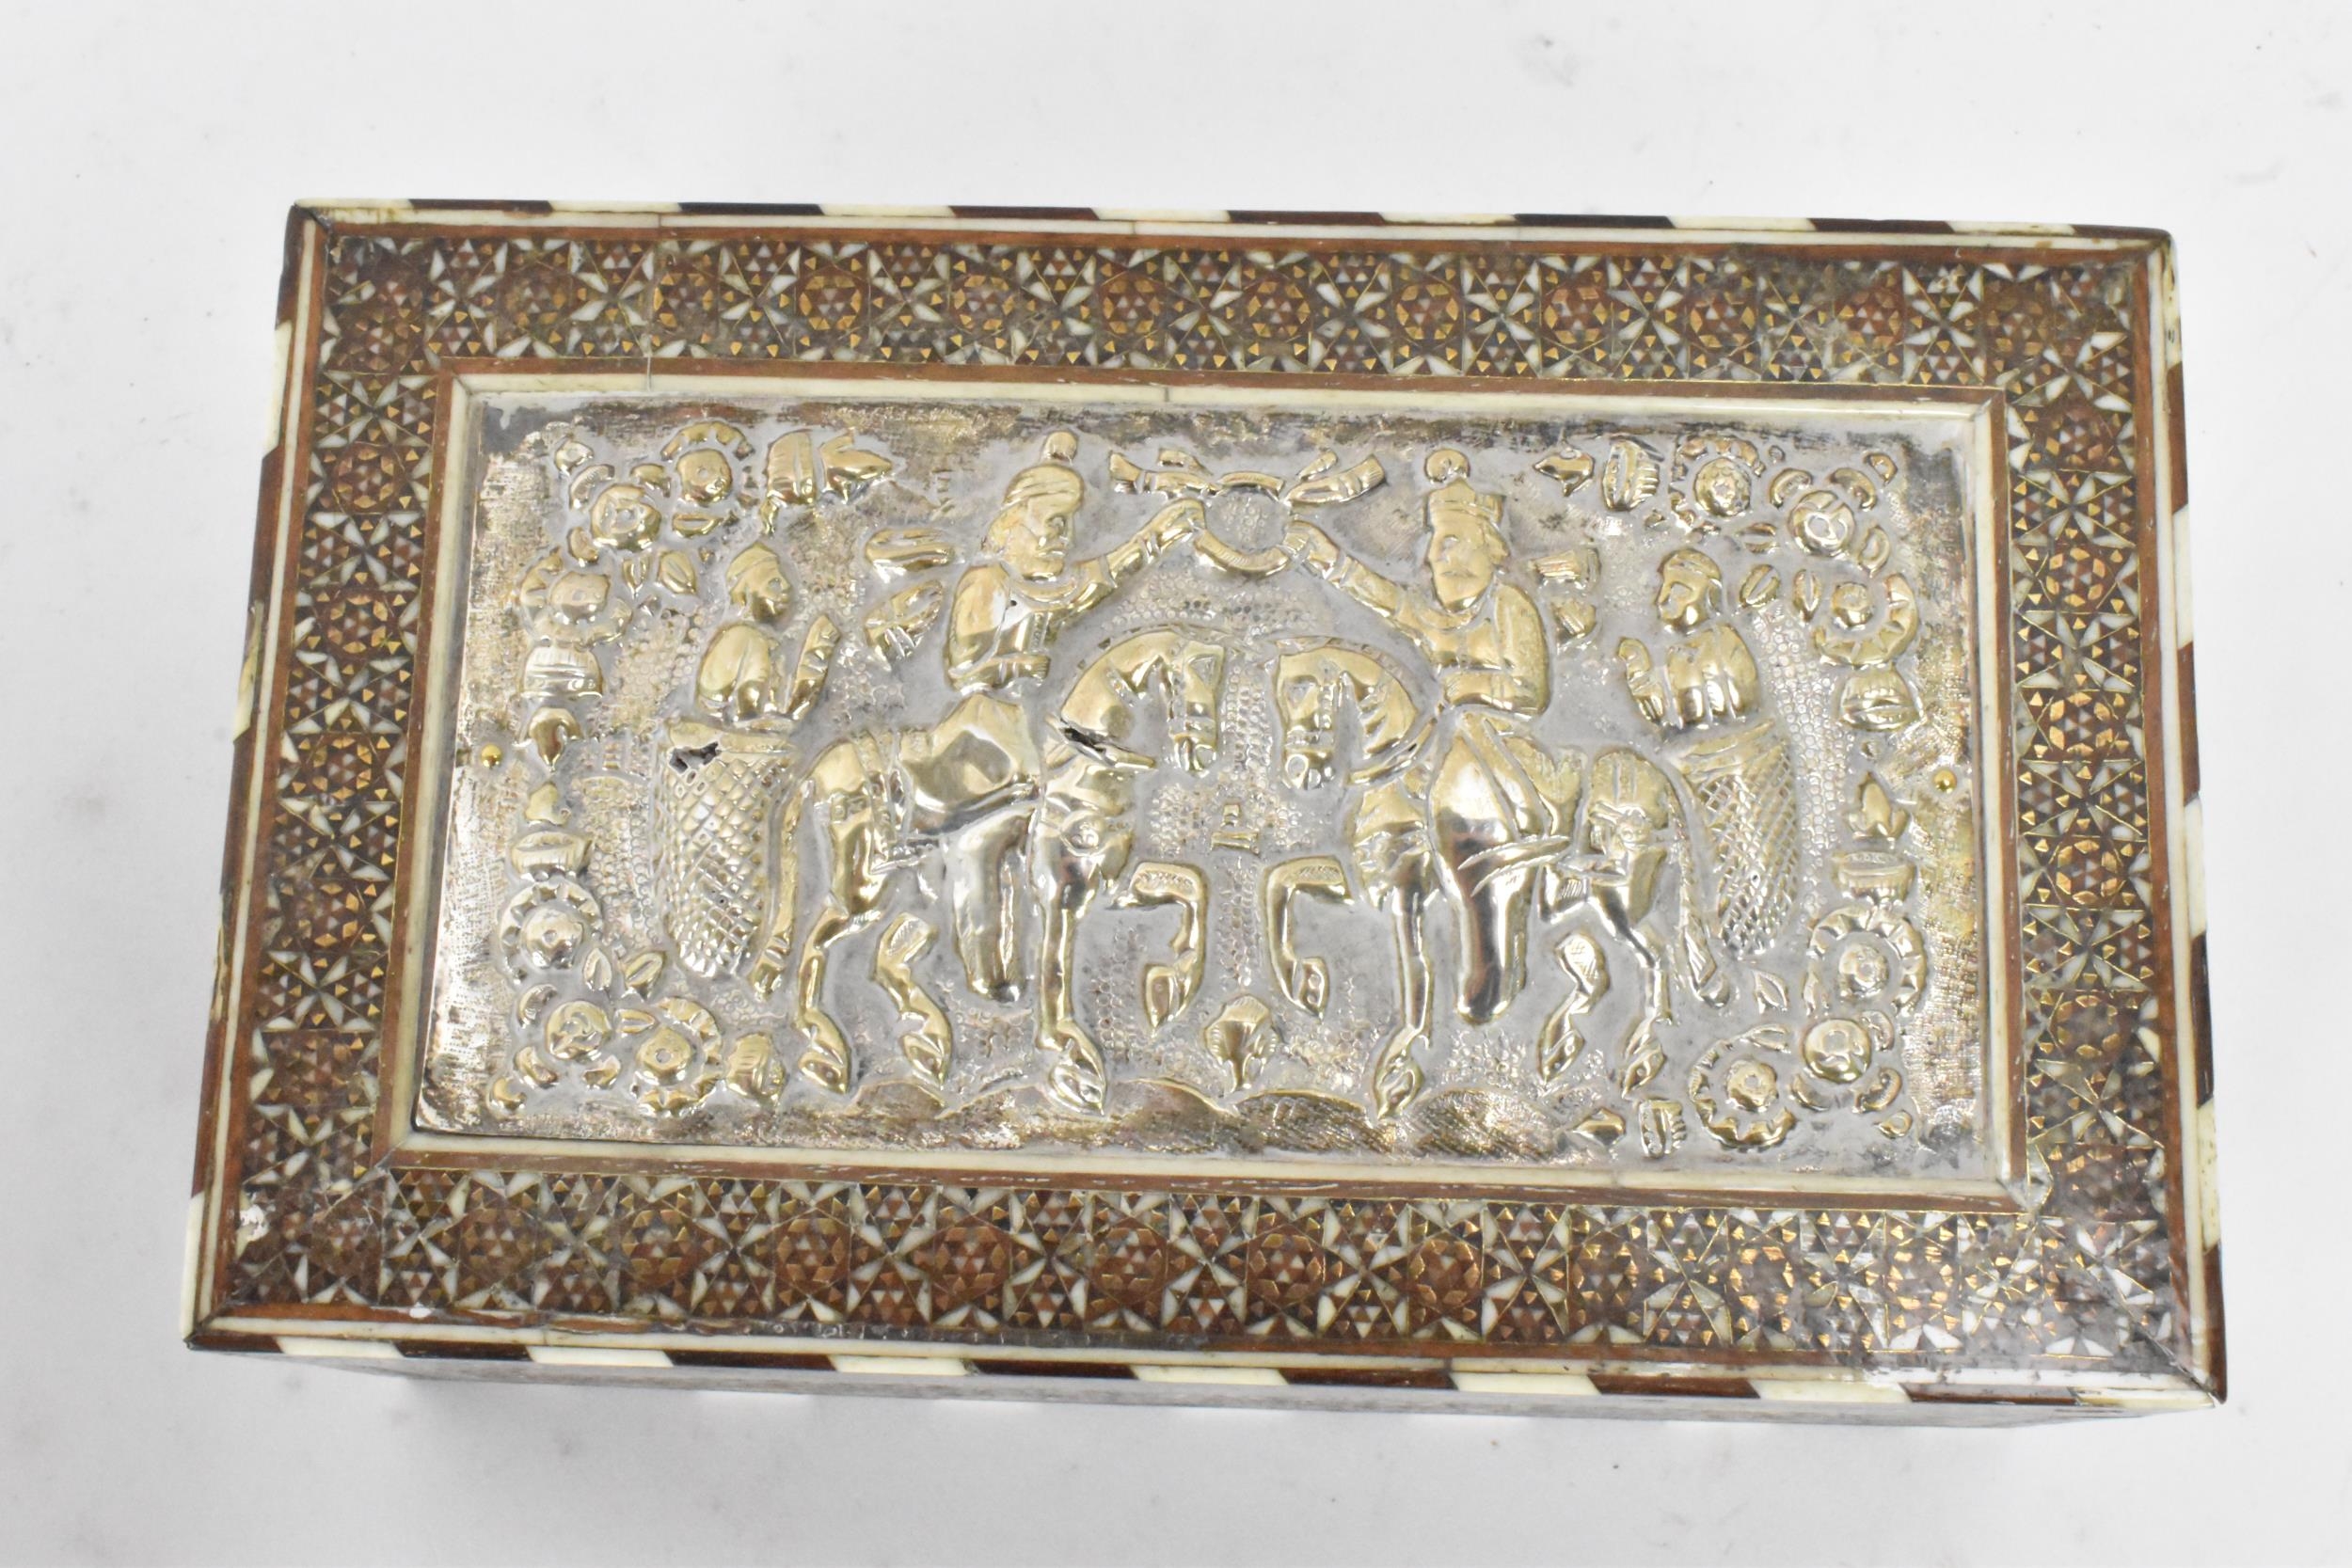 A late 19th century Indo-Persian katamkari cigarette box, decorated with a silver repousse panel - Image 2 of 8